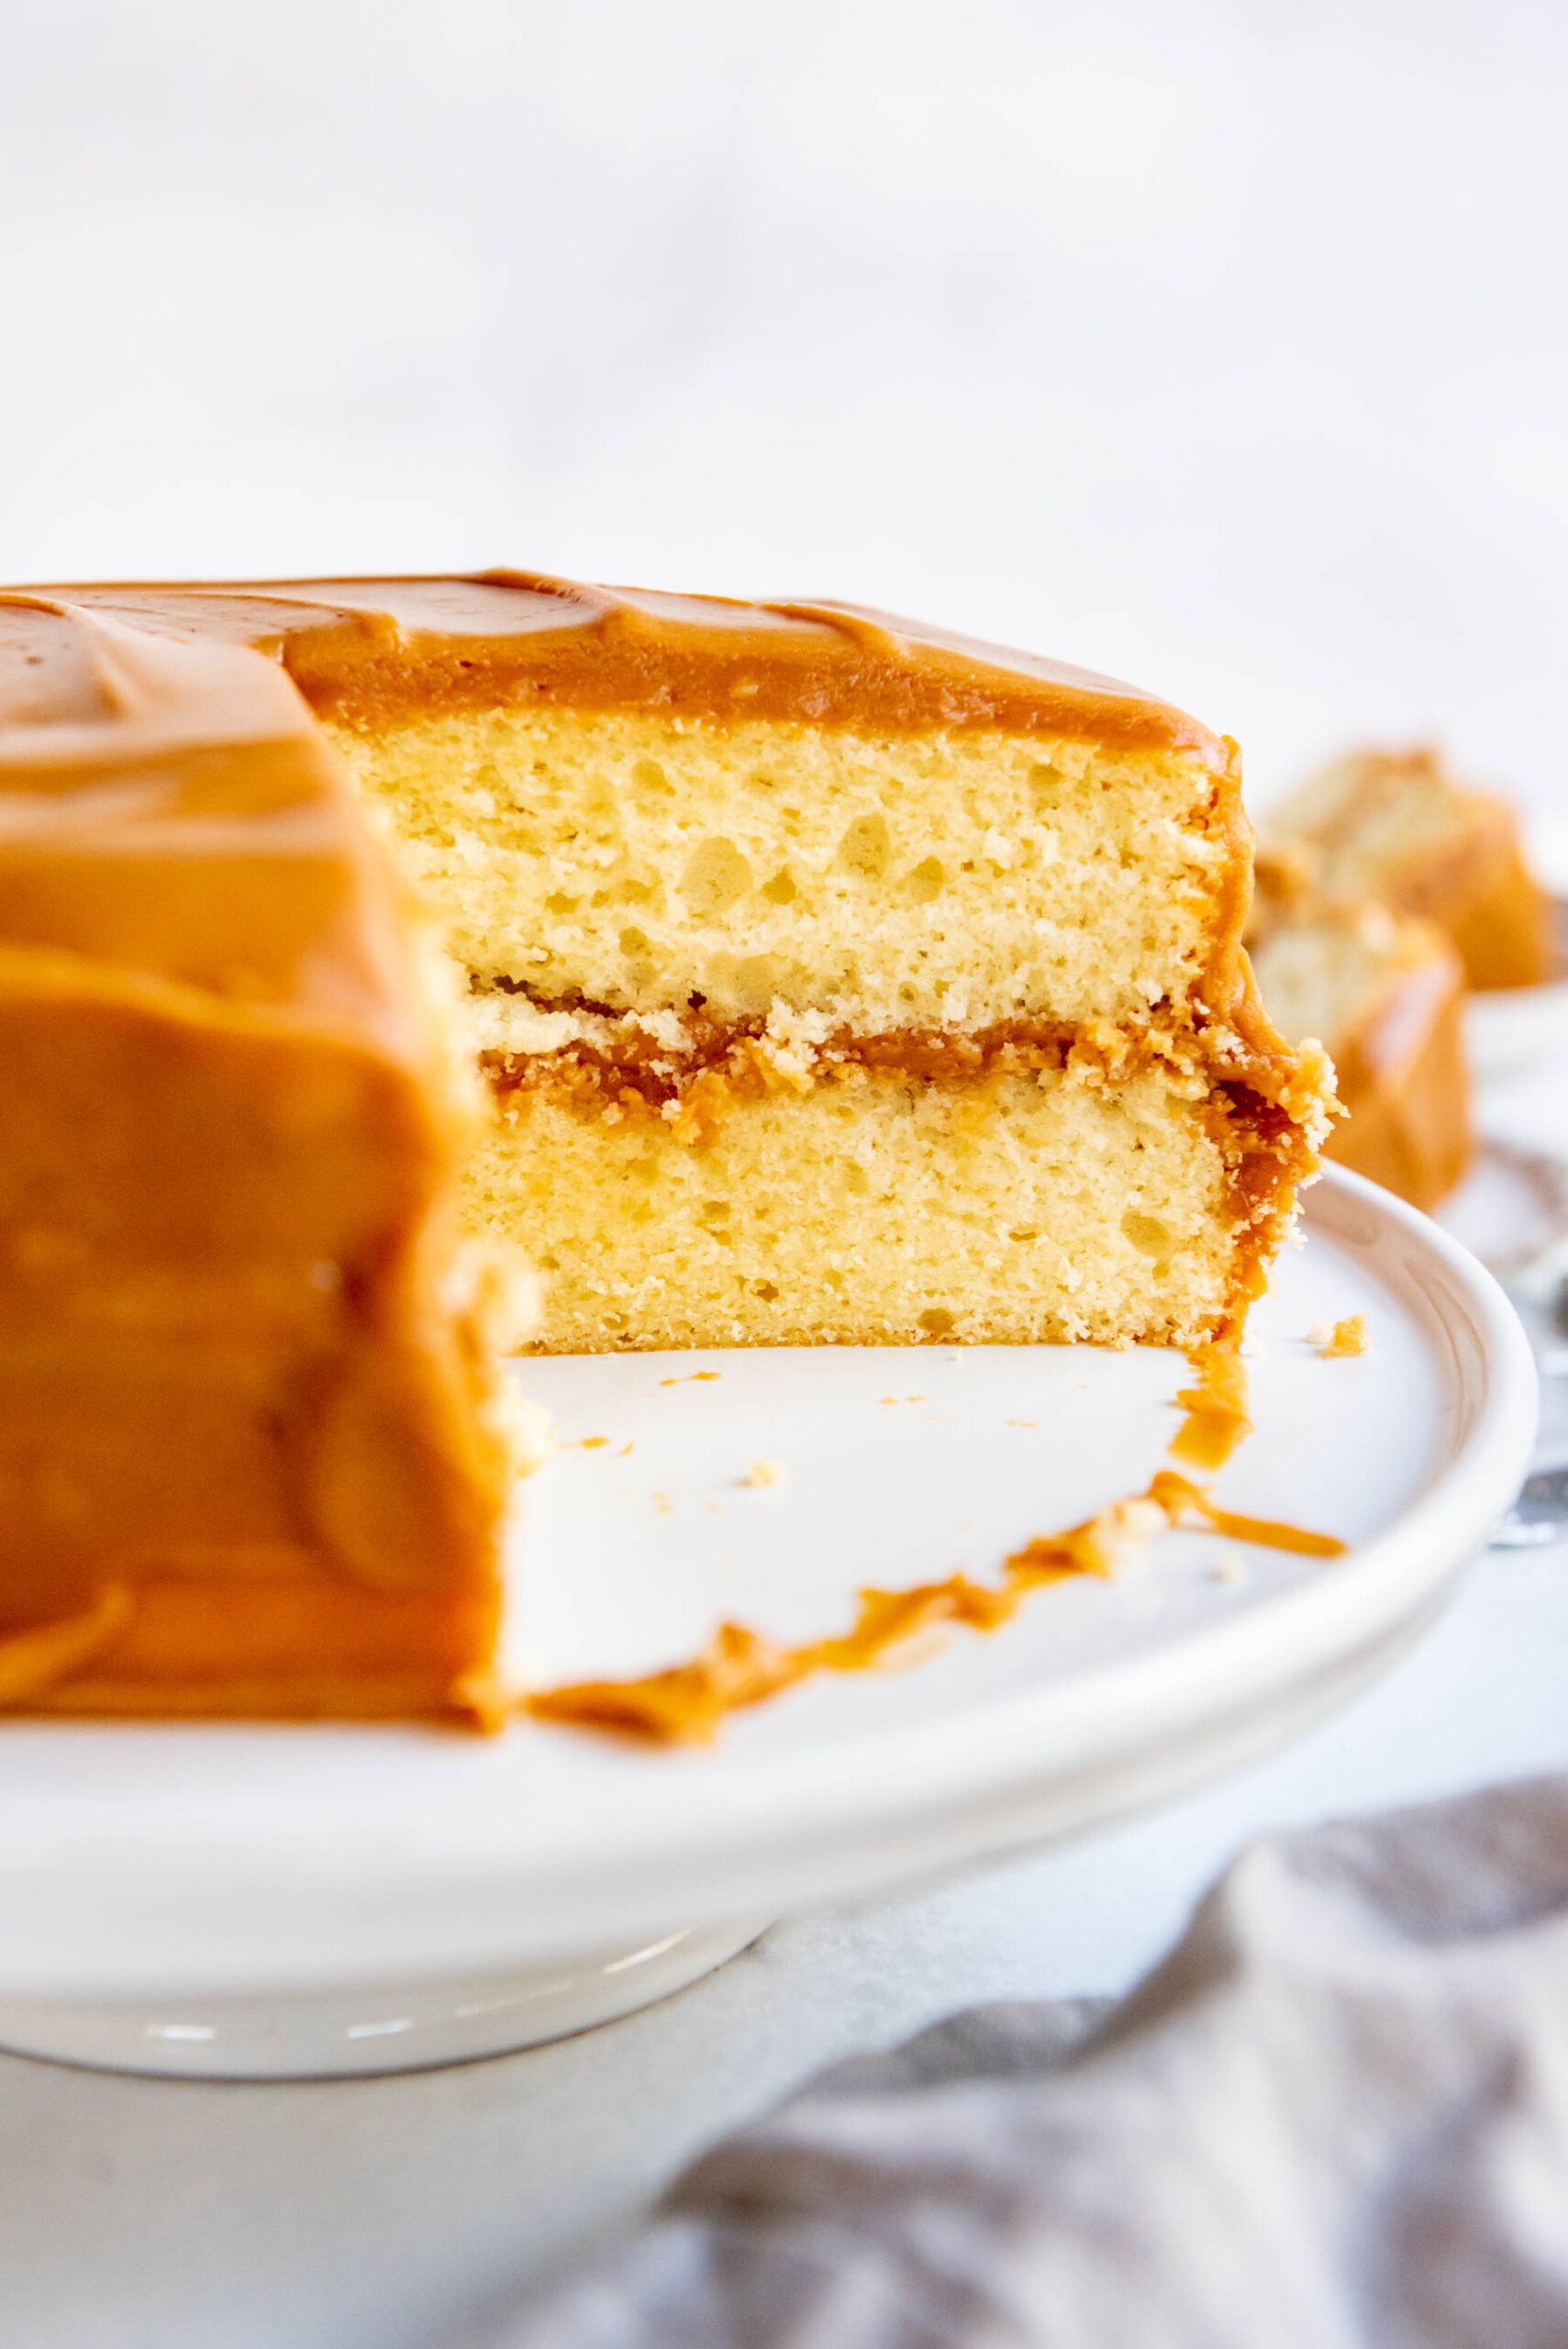 A side view of a caramel cake with a few slices removed.